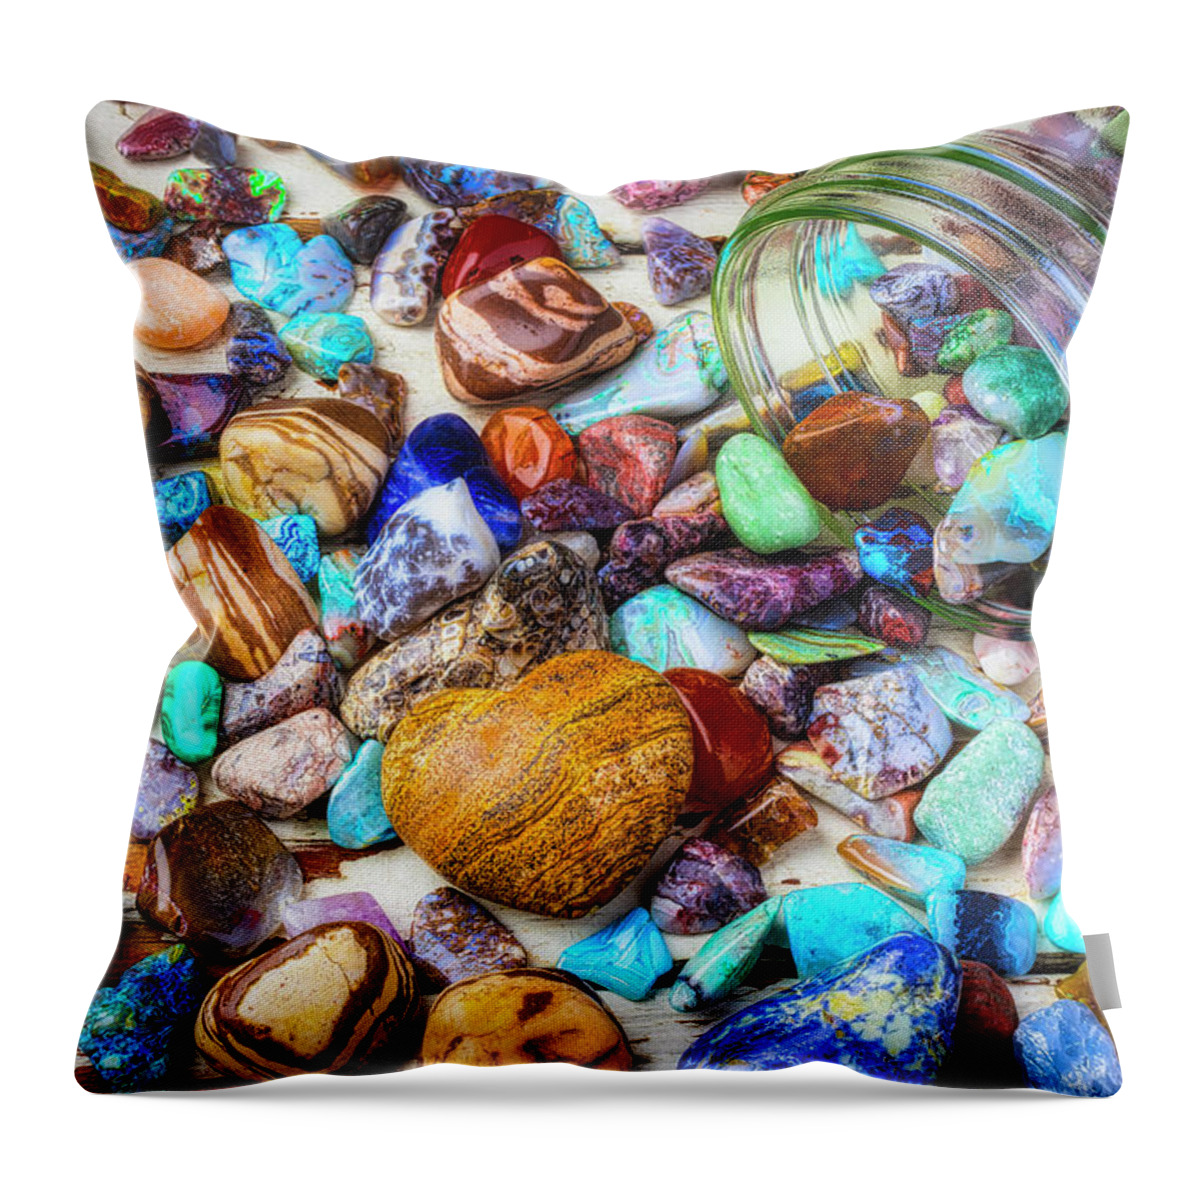 Stone Throw Pillow featuring the photograph Jar Of Rocks And Heart Stone by Garry Gay